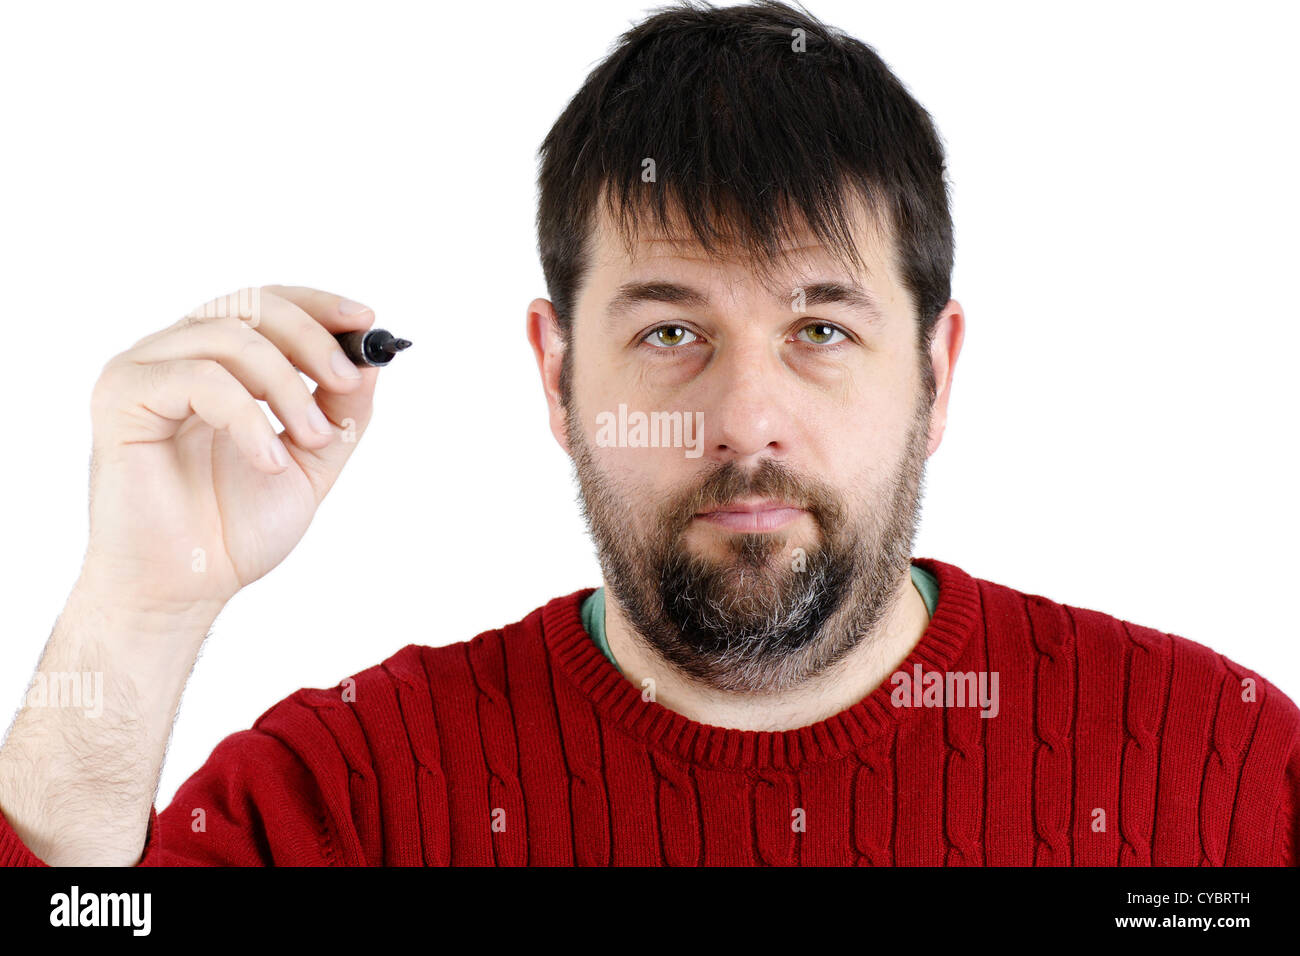 Ordinary guy, regular joe, ready to write something with his big black felt pen, real candid person. Stock Photo